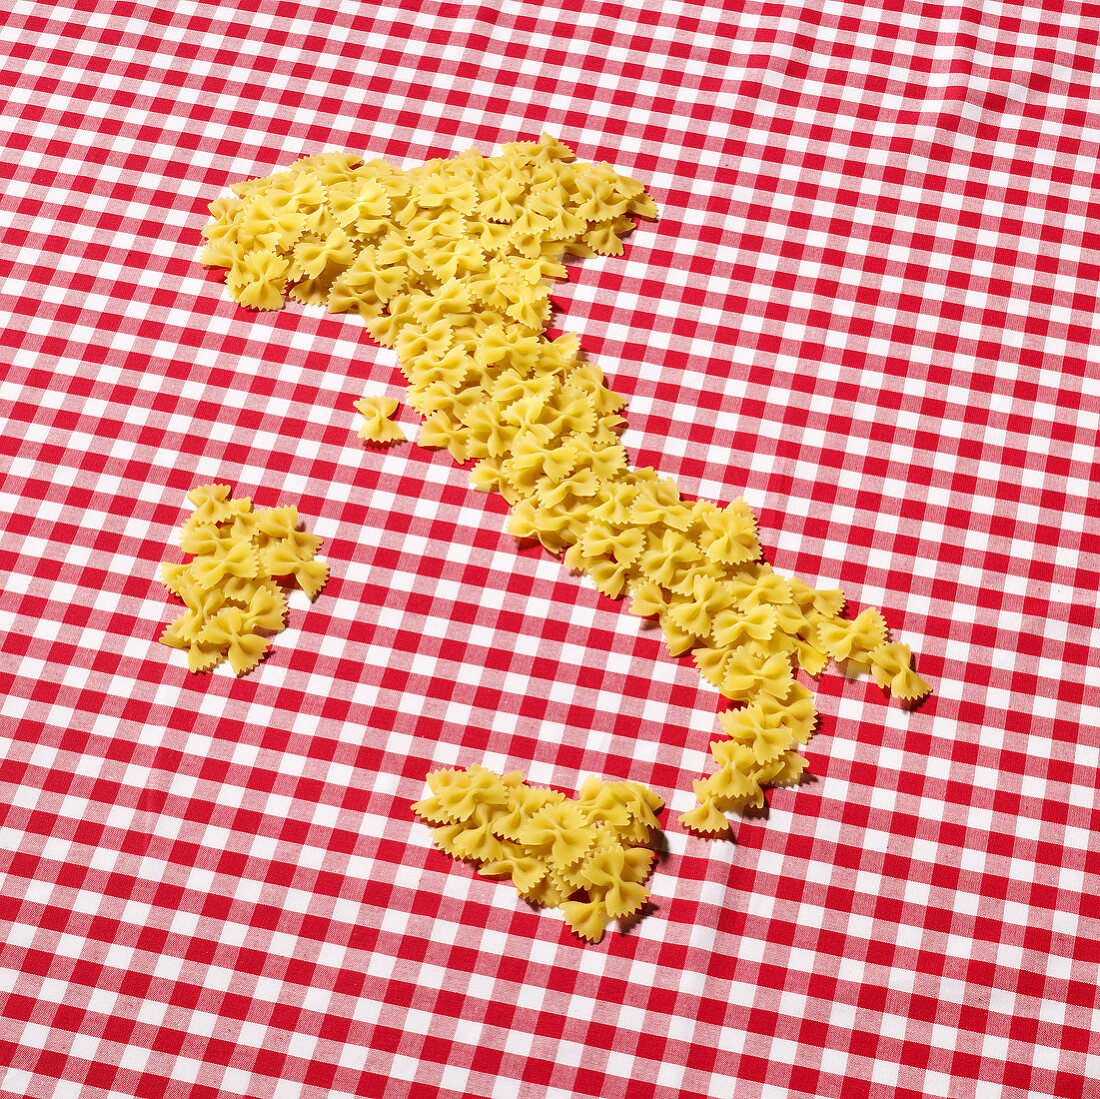 Farfalle in the shape of the map of Italy